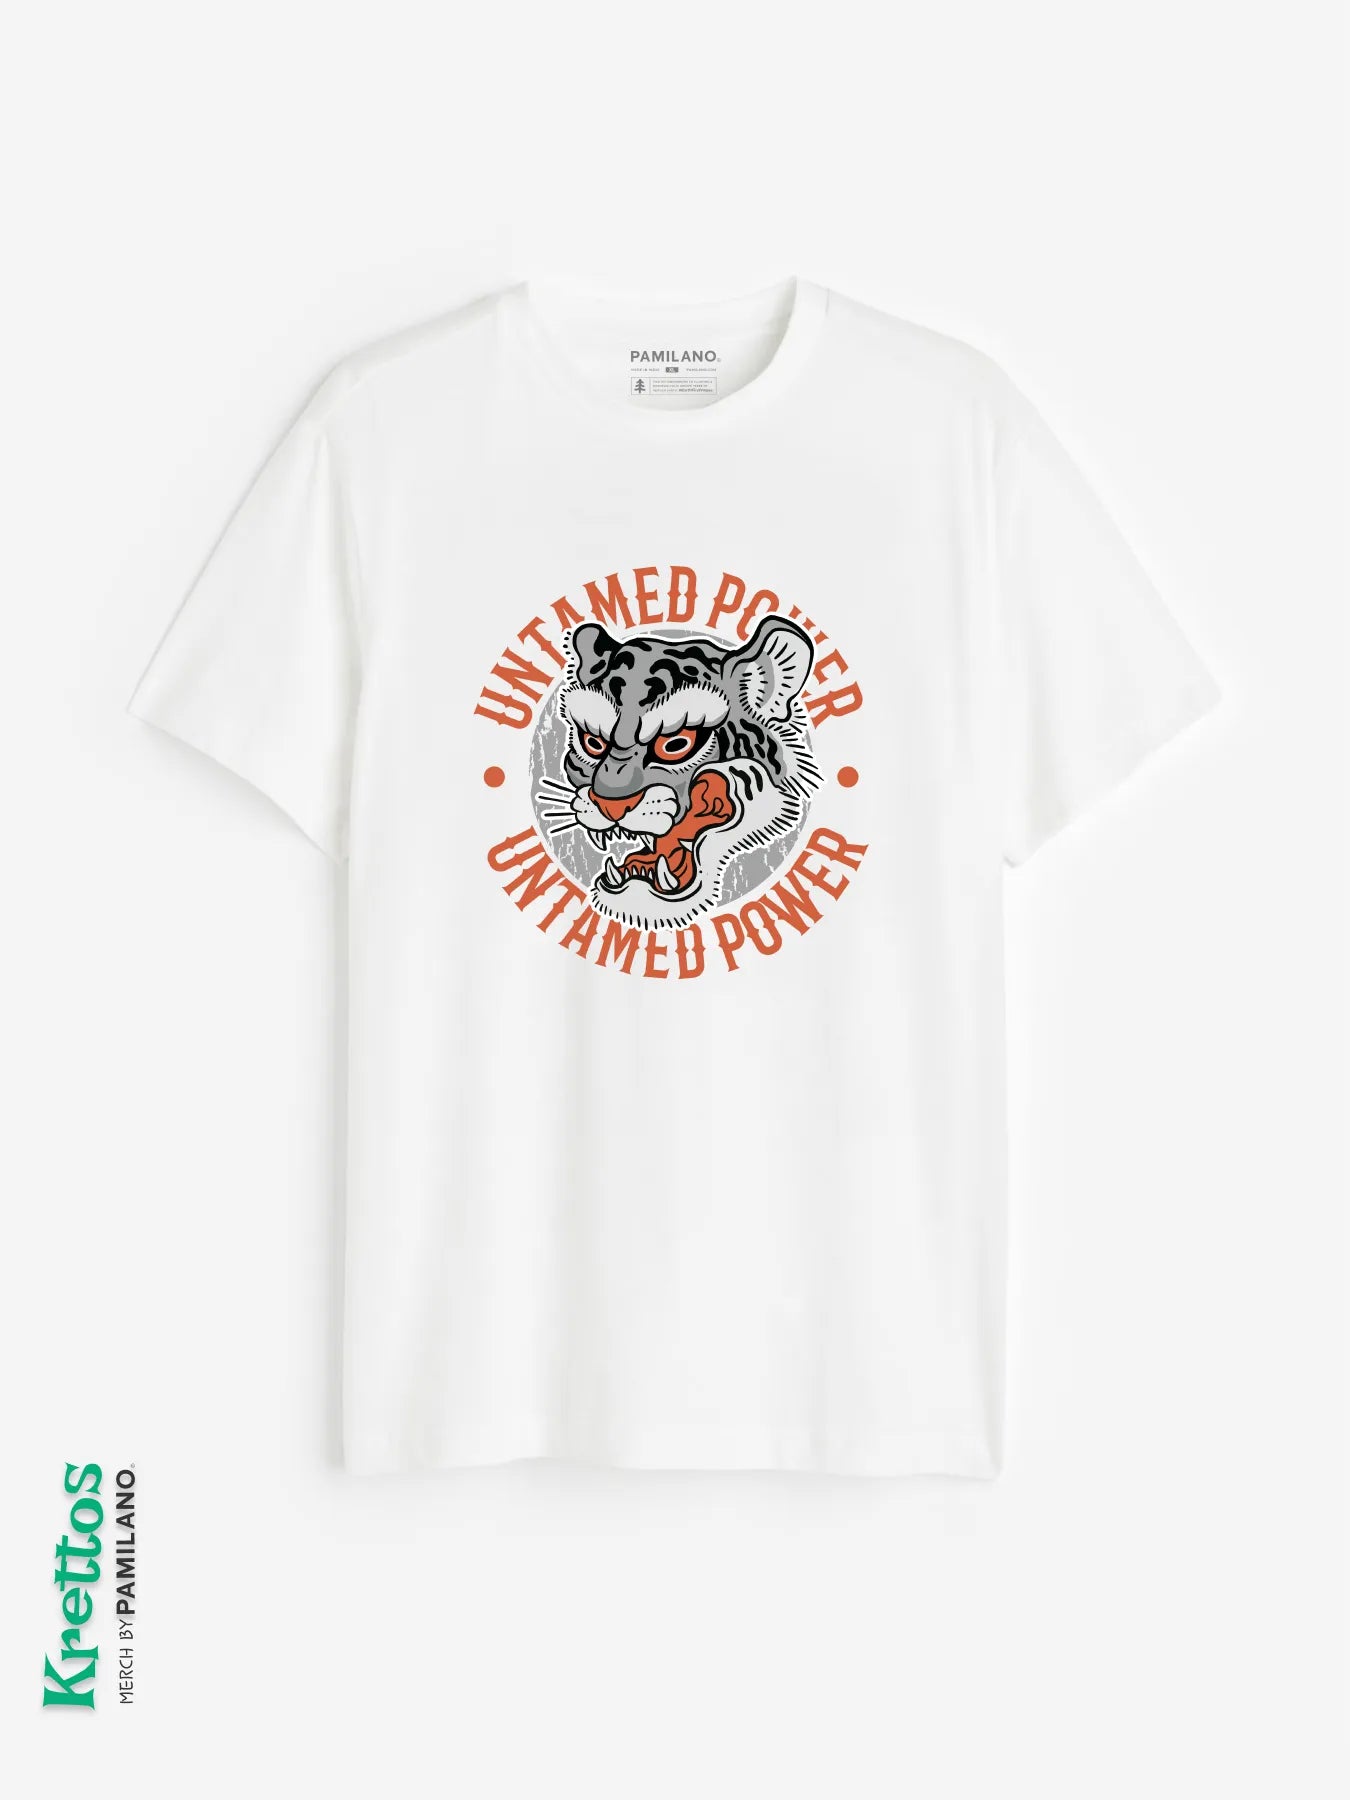 A Tiger's Head and Quote "Untamed Power"